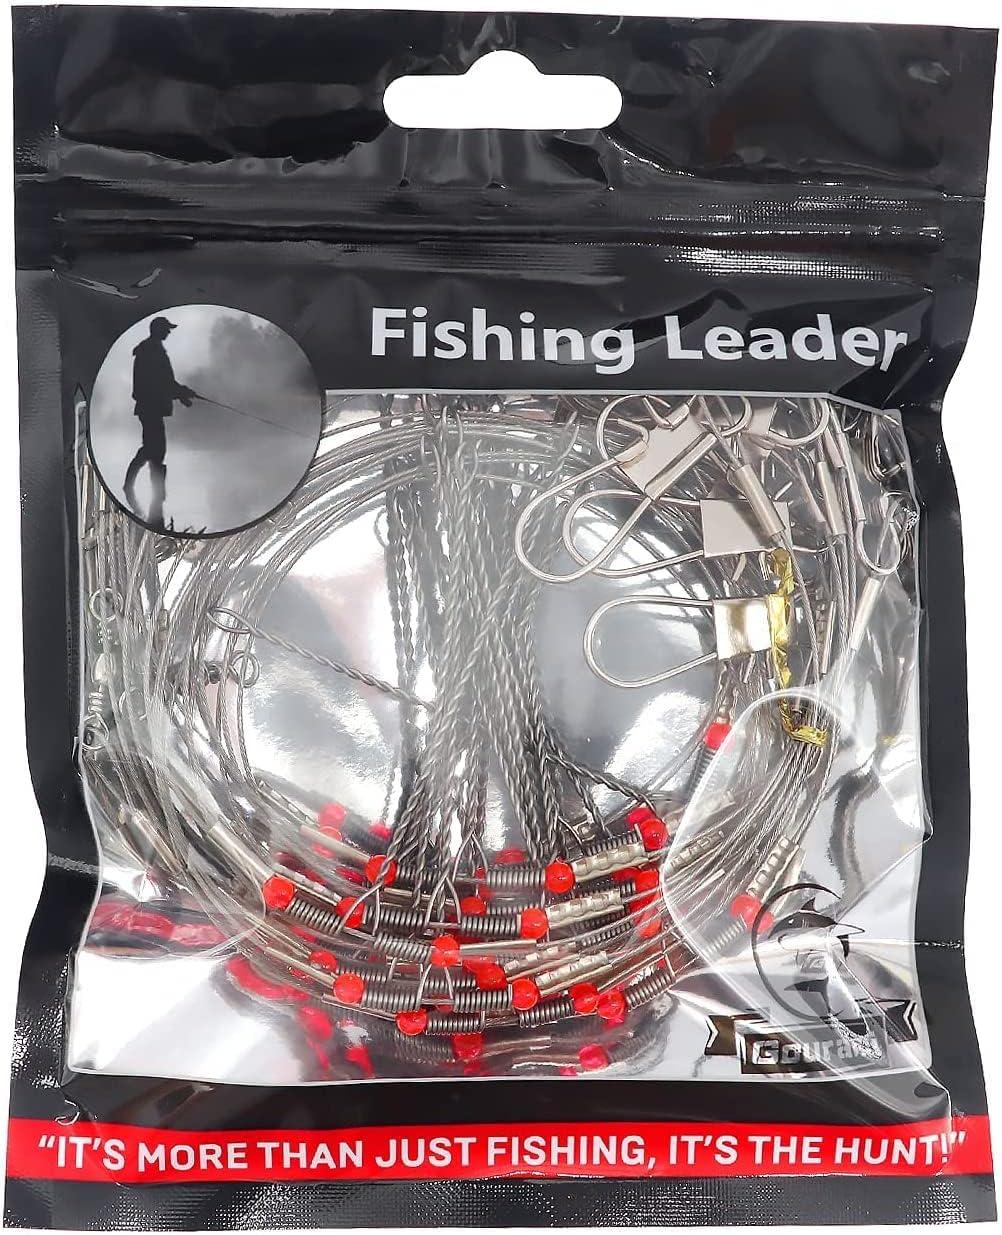 YOTO Fishing Tackle Leaders,Hi-Low Rig,Double Arms Saltwater Stainless  Steel Leader with Swivels,High-Strength Fish Wire Gear Equipment, Fishing  Gift C1-17.7 70lb-12pcs, Fish Wire